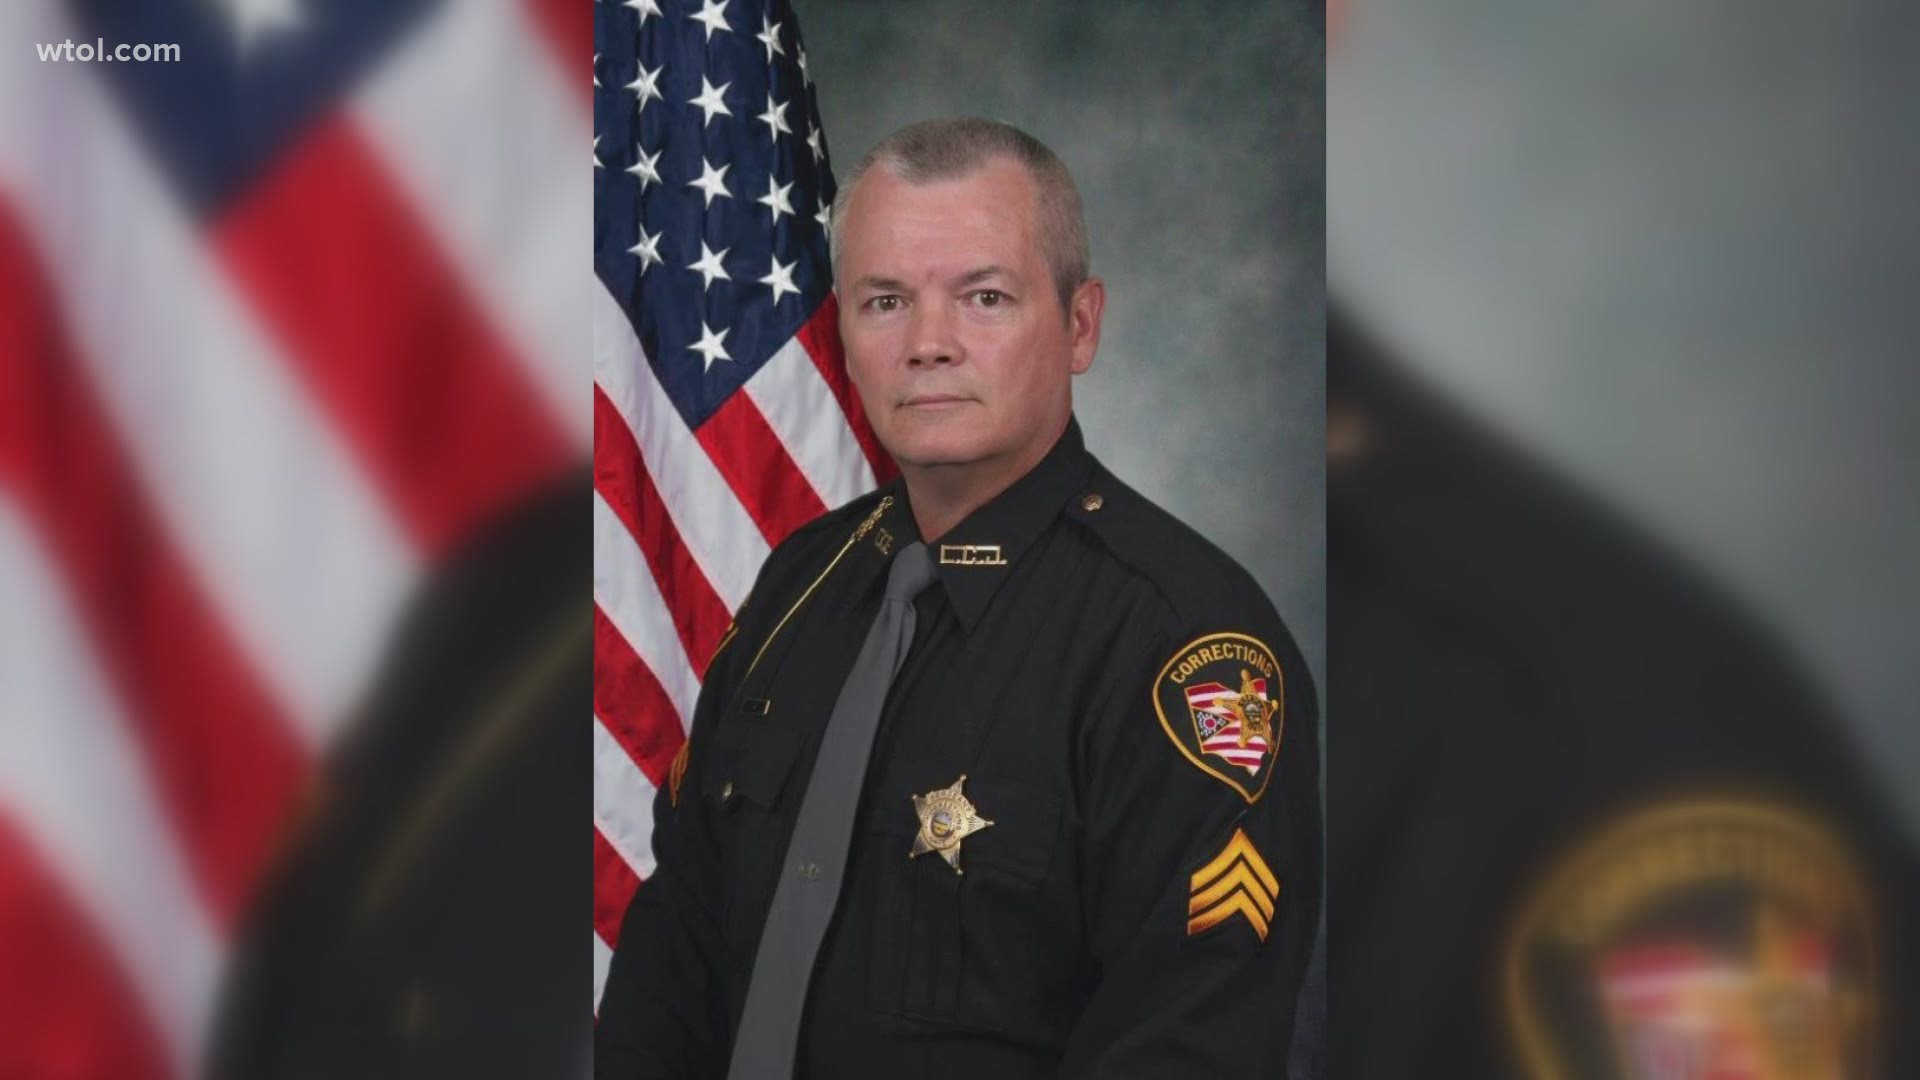 Sgt. Samuel Mysinger is under internal investigation after his post referenced draining the "black swamp," following the arrests of 4 Toledo City Council members.